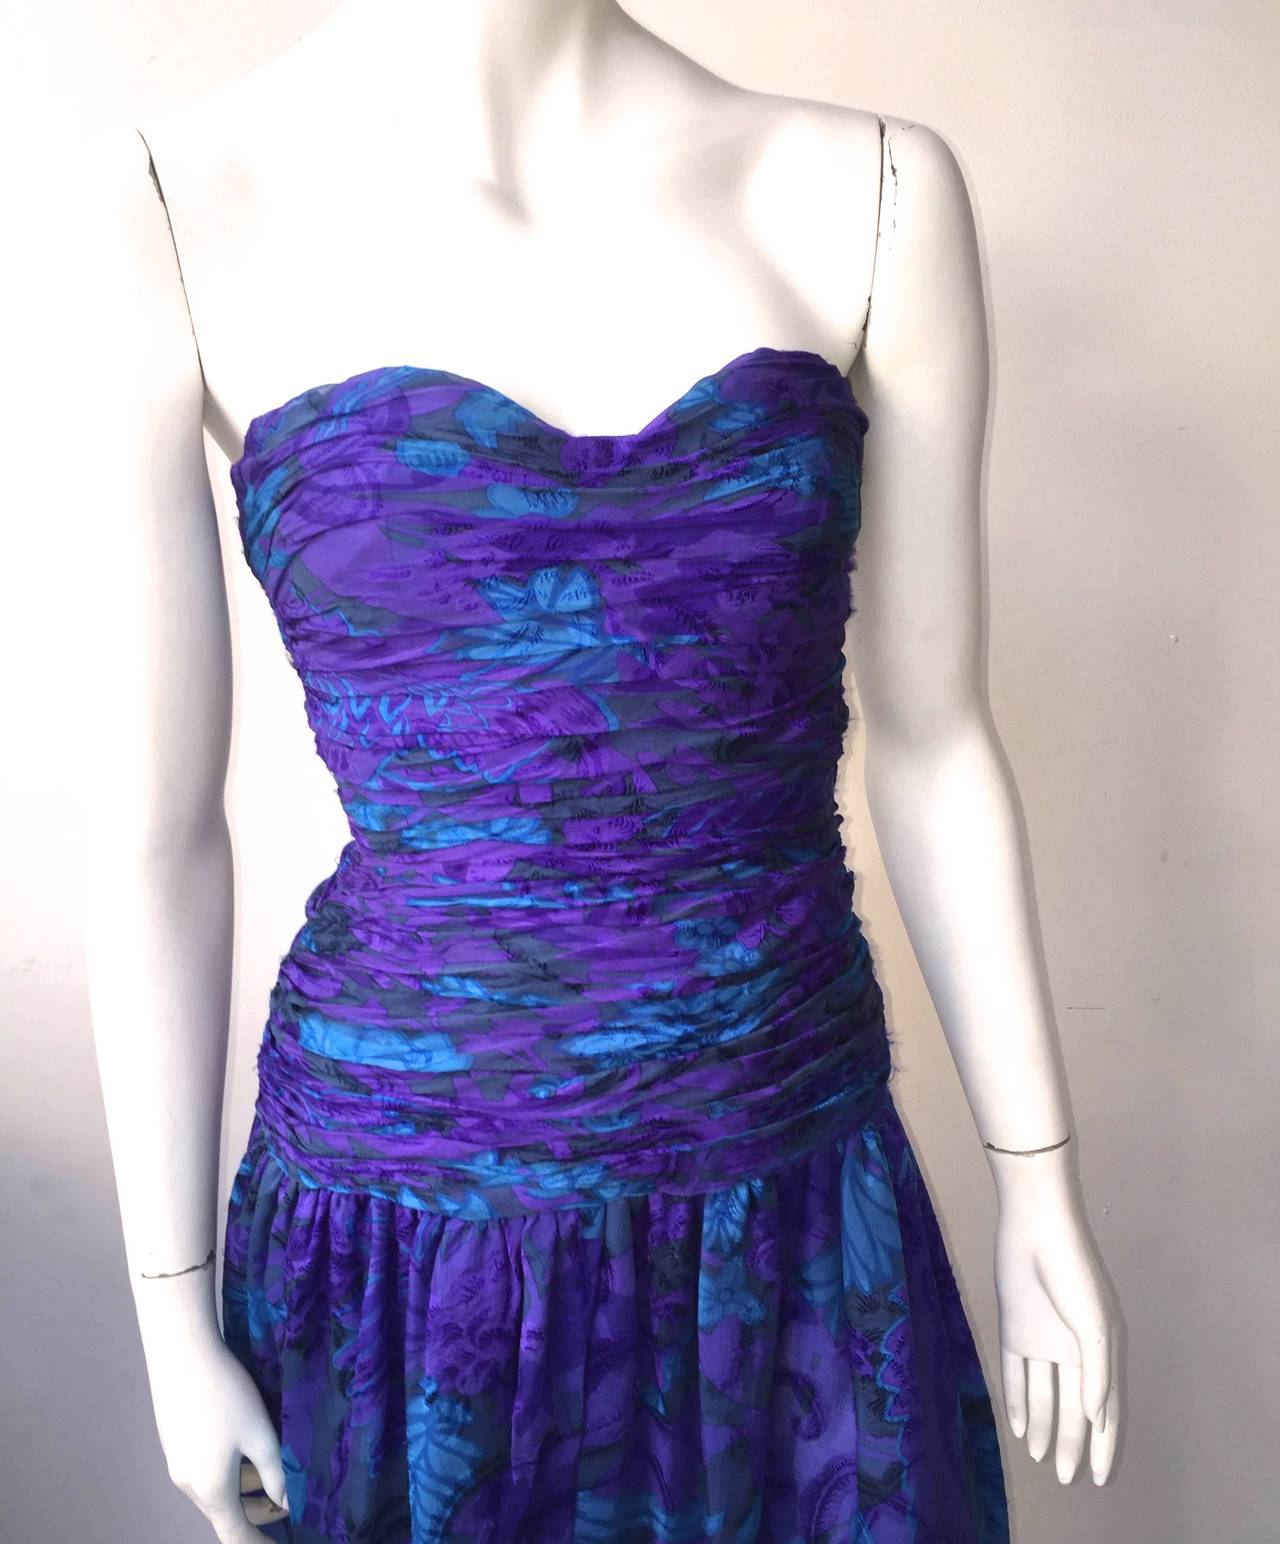 Carolyne Roehm 80s blue / purple silk strapless gown size 4. 
Bodice is ruche and skirt has sexy slit up front. 
Floral patterns with shades of blues & purples.
Bone corset inside as shown in photo.
Silk lining.
Made in USA.

Carolyne Roehm